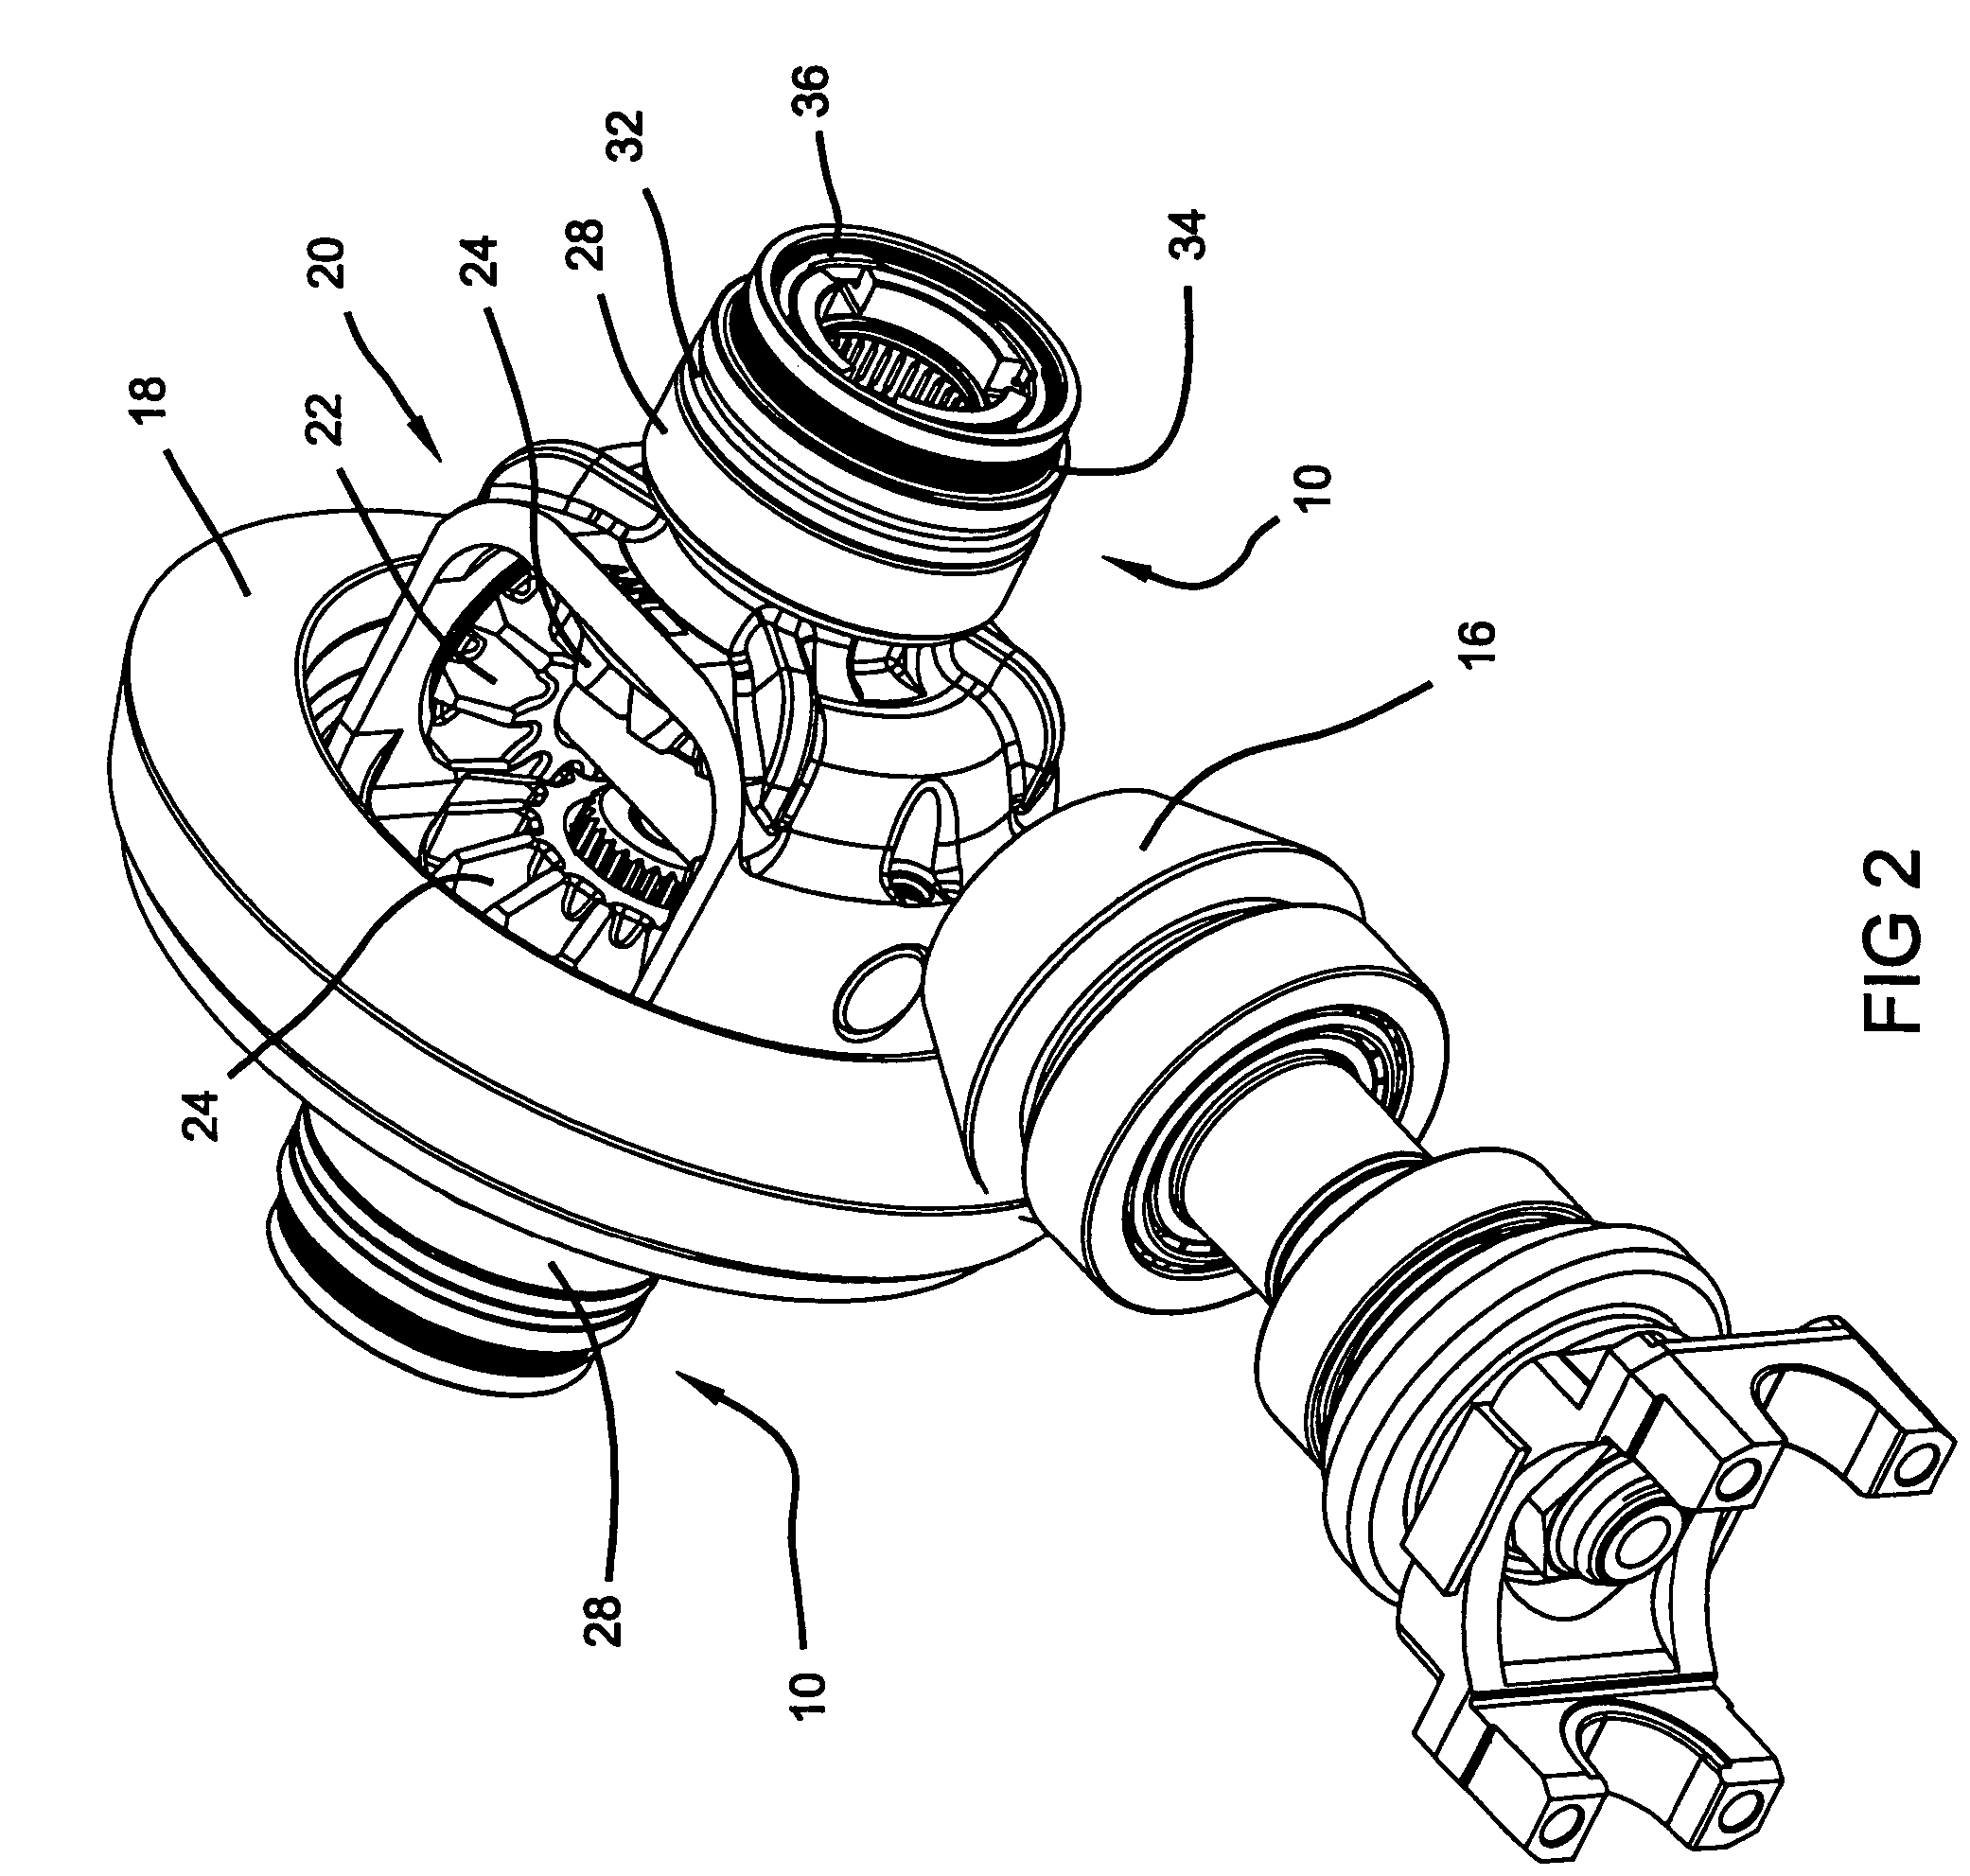 Axle assembly with bearing adjustment mechanism